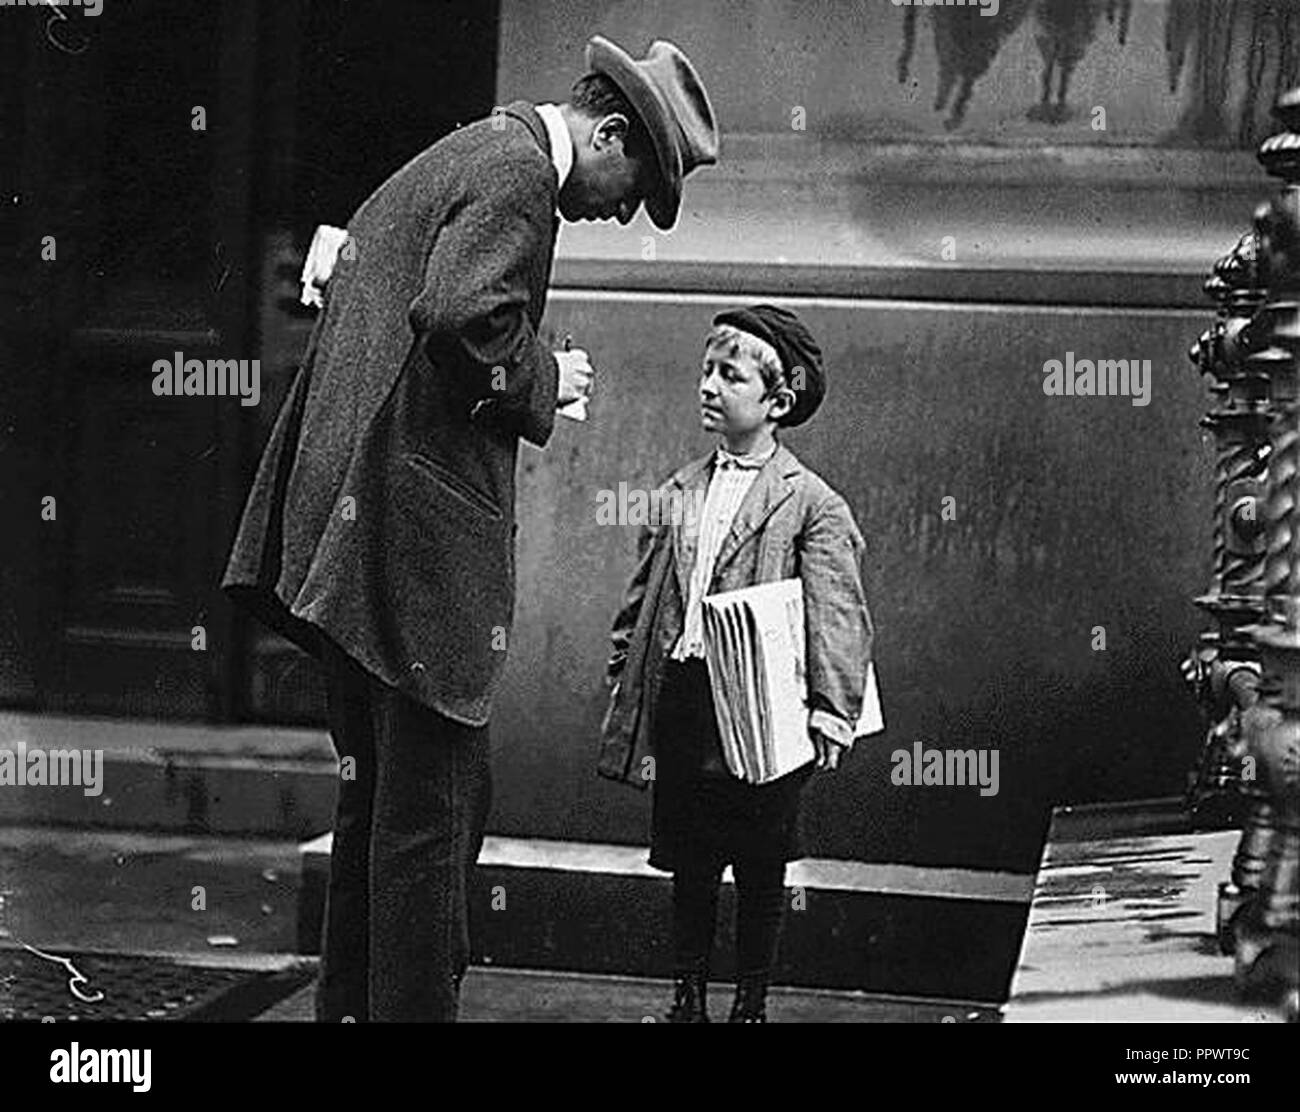 Boy selling newspapers by Lewis Hine. Stock Photo